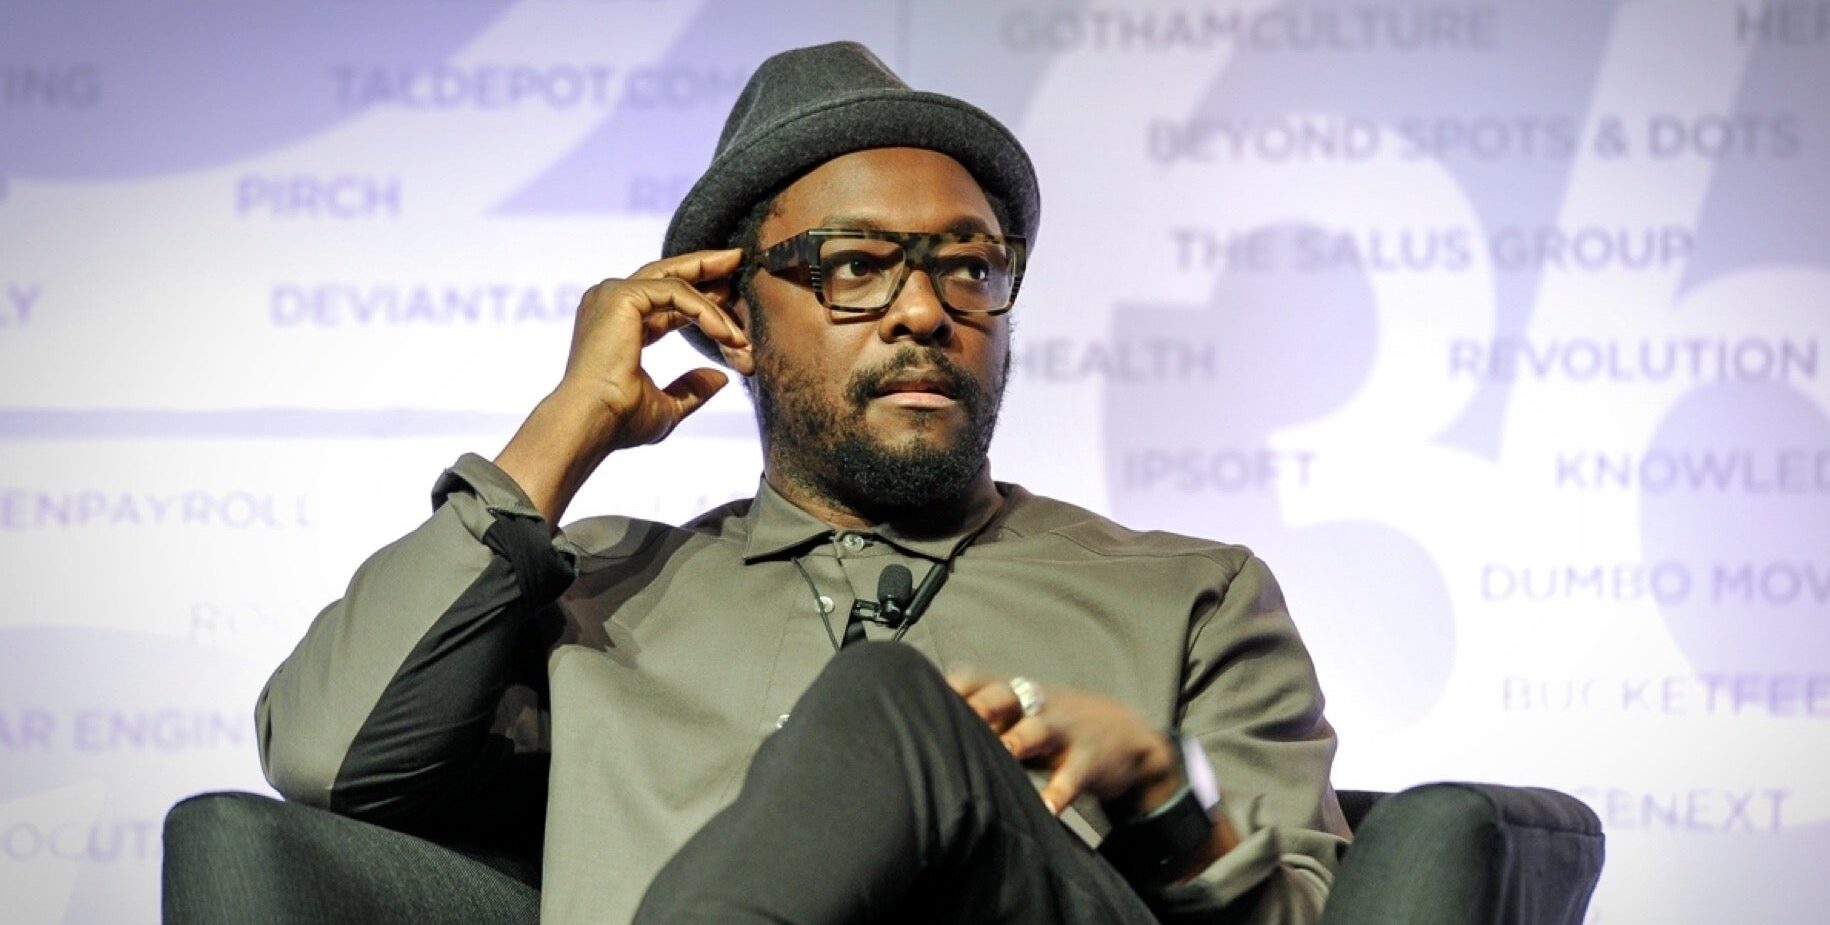 Image of will.i.am singer of Mind Your Business